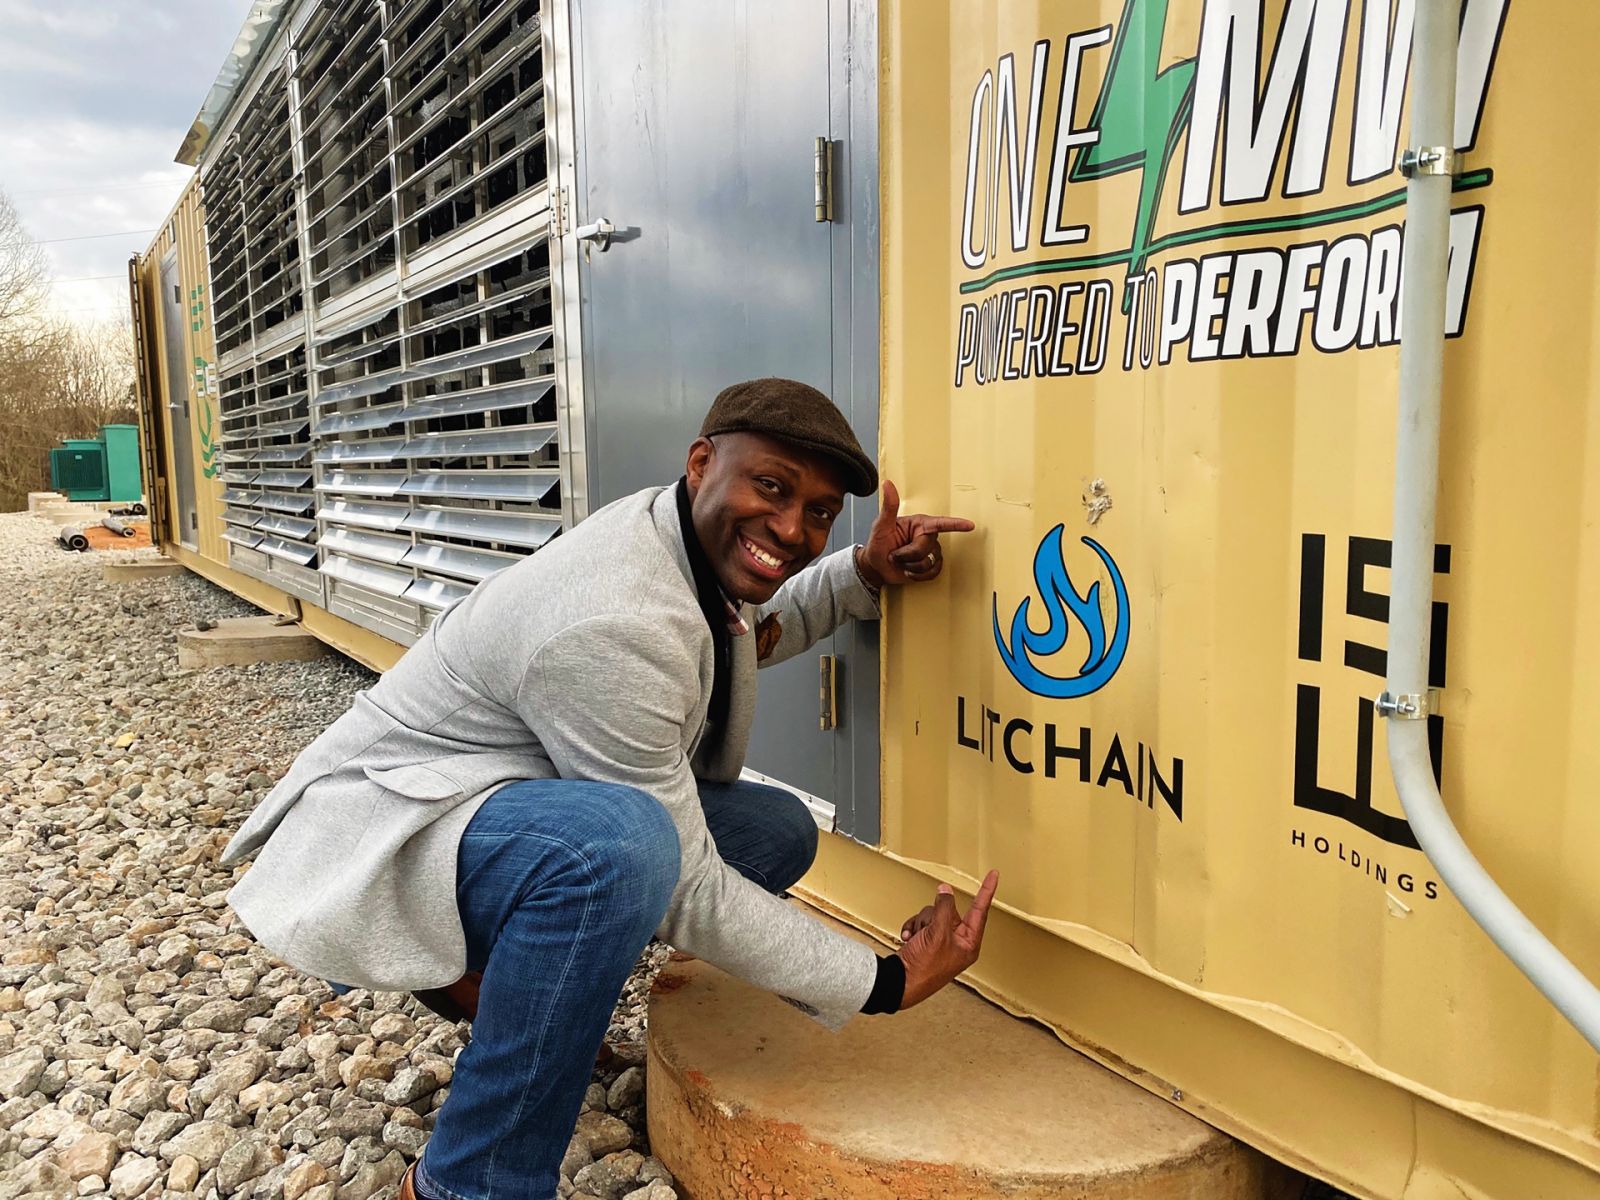 Litchain founder Tony Tate has installed a site of portable cryptomining pods in Gaffney with an $80 million investment, but he said that's just the beginning of his rollout across the state. (Photo/Provided)